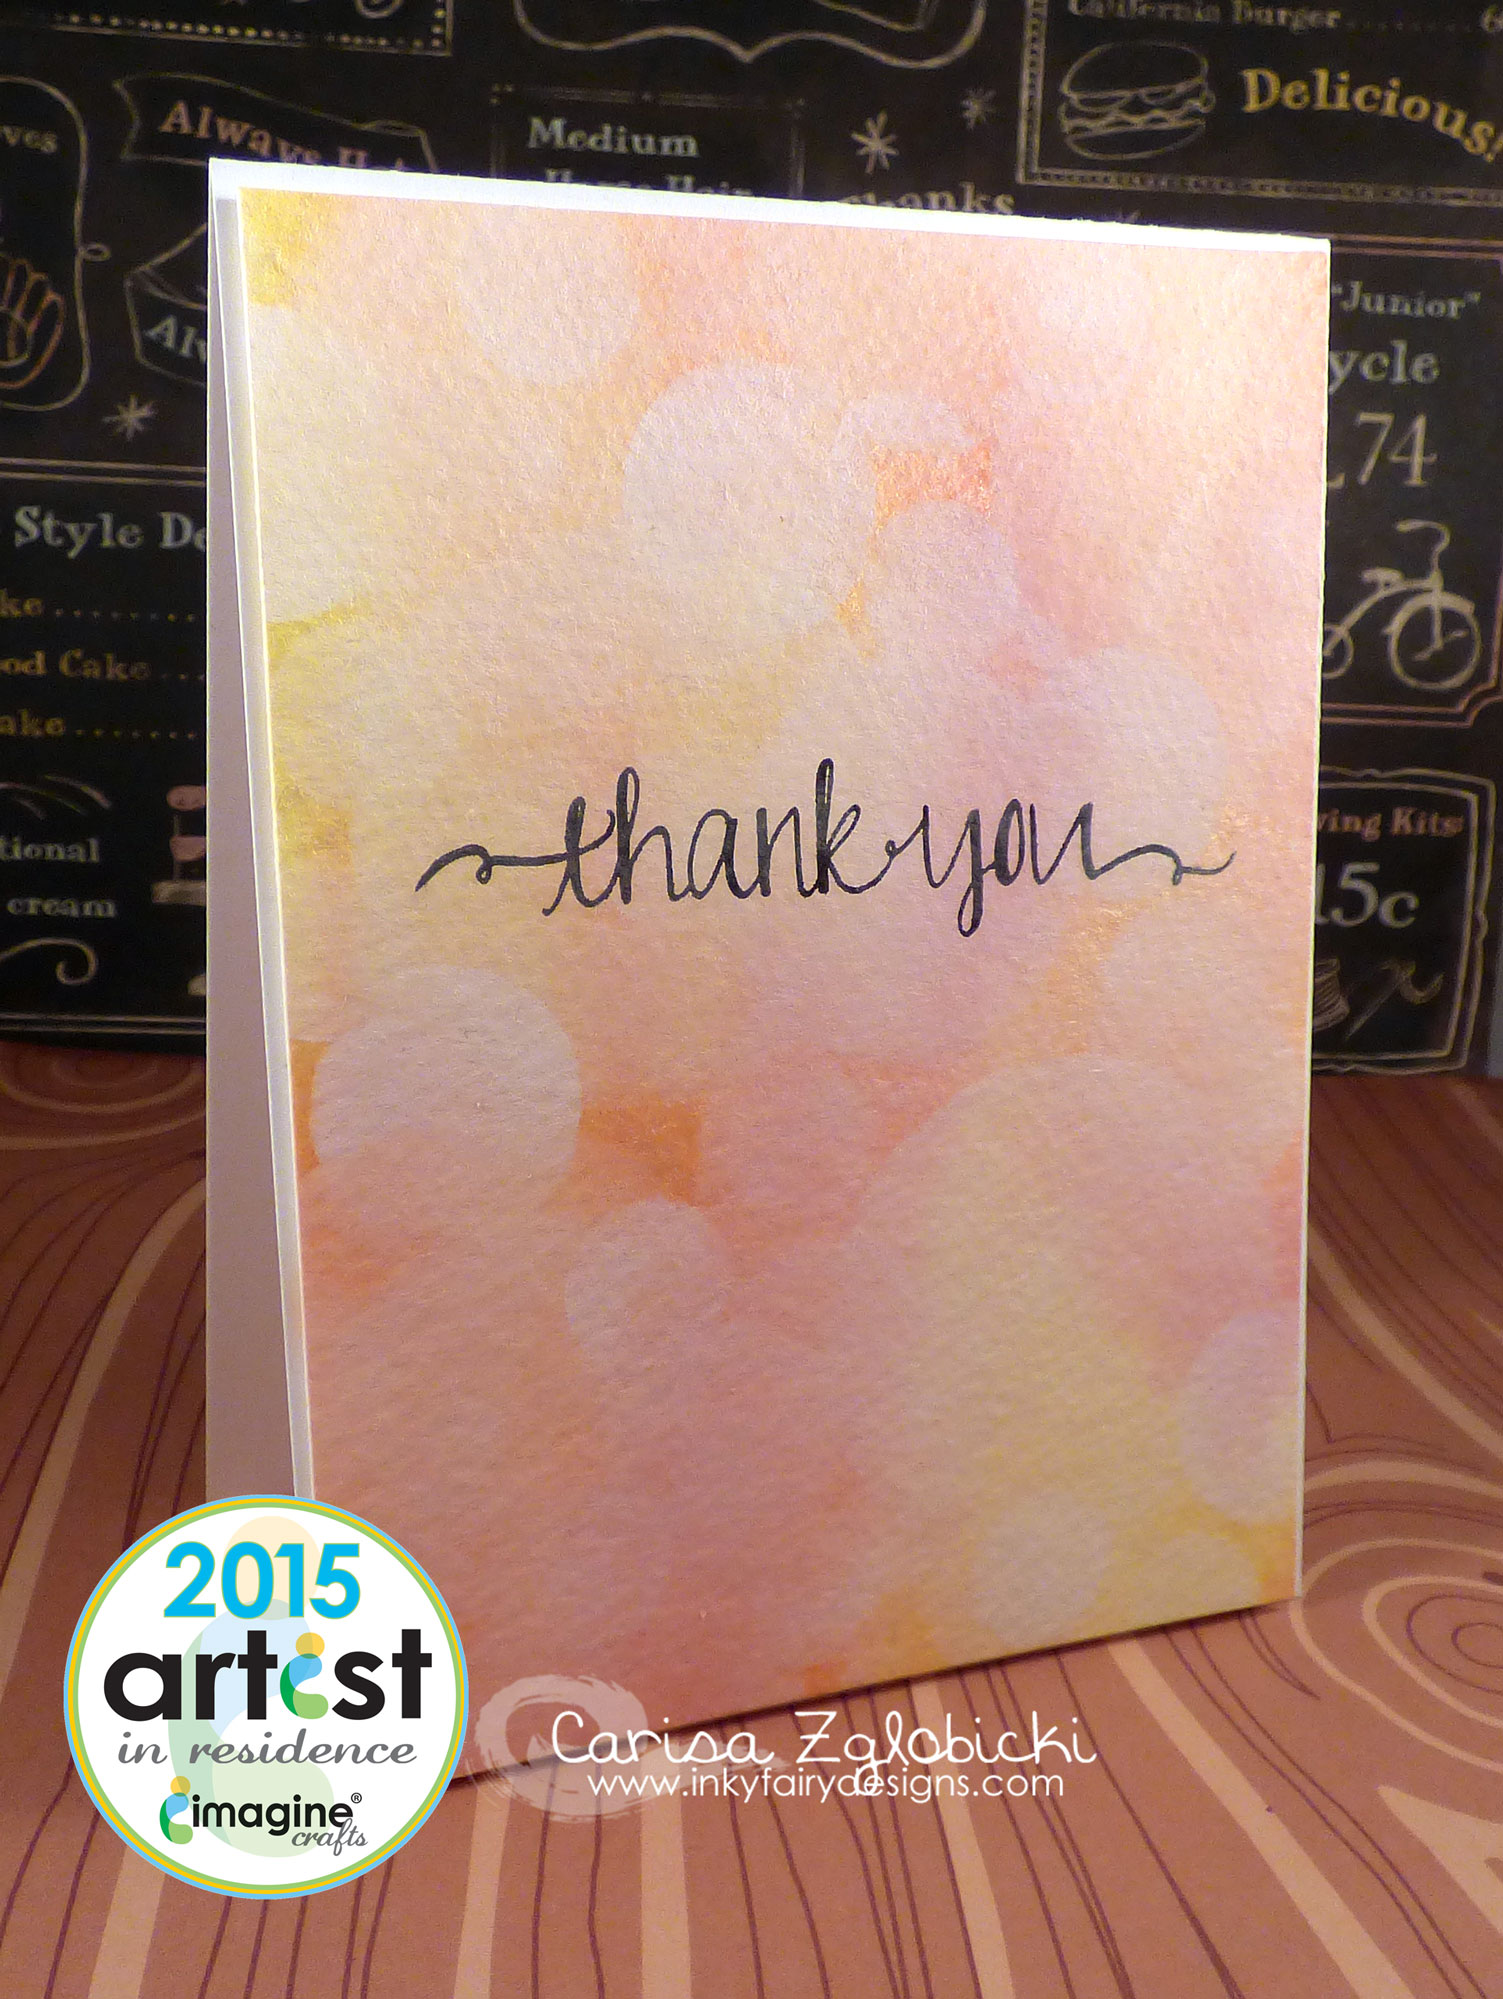 Handmade thank you card featuring a bokeh effect made with inks in yellows, oranges and coral colors.